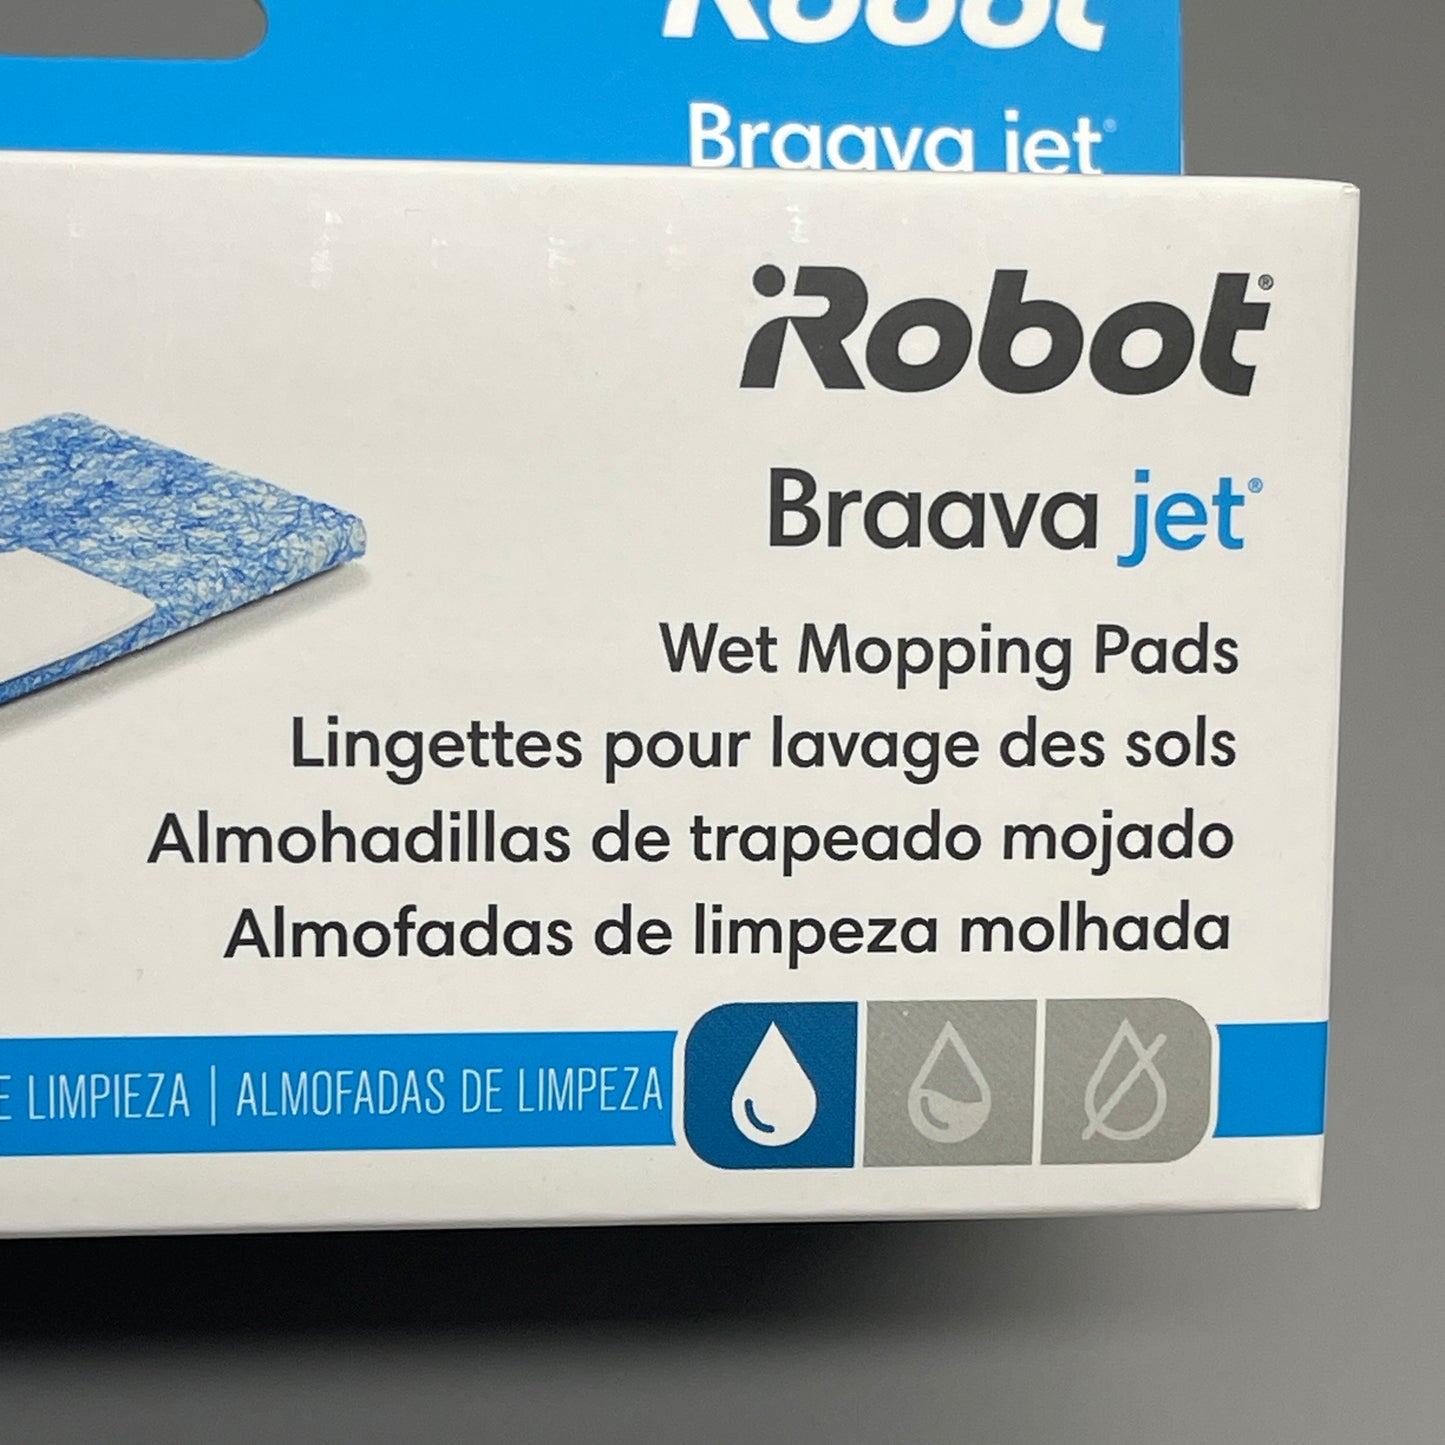 IROBOT 10-PACK! Braava Jet Wet Mopping Pads Cleaning Pads OEM 4657840 (New)